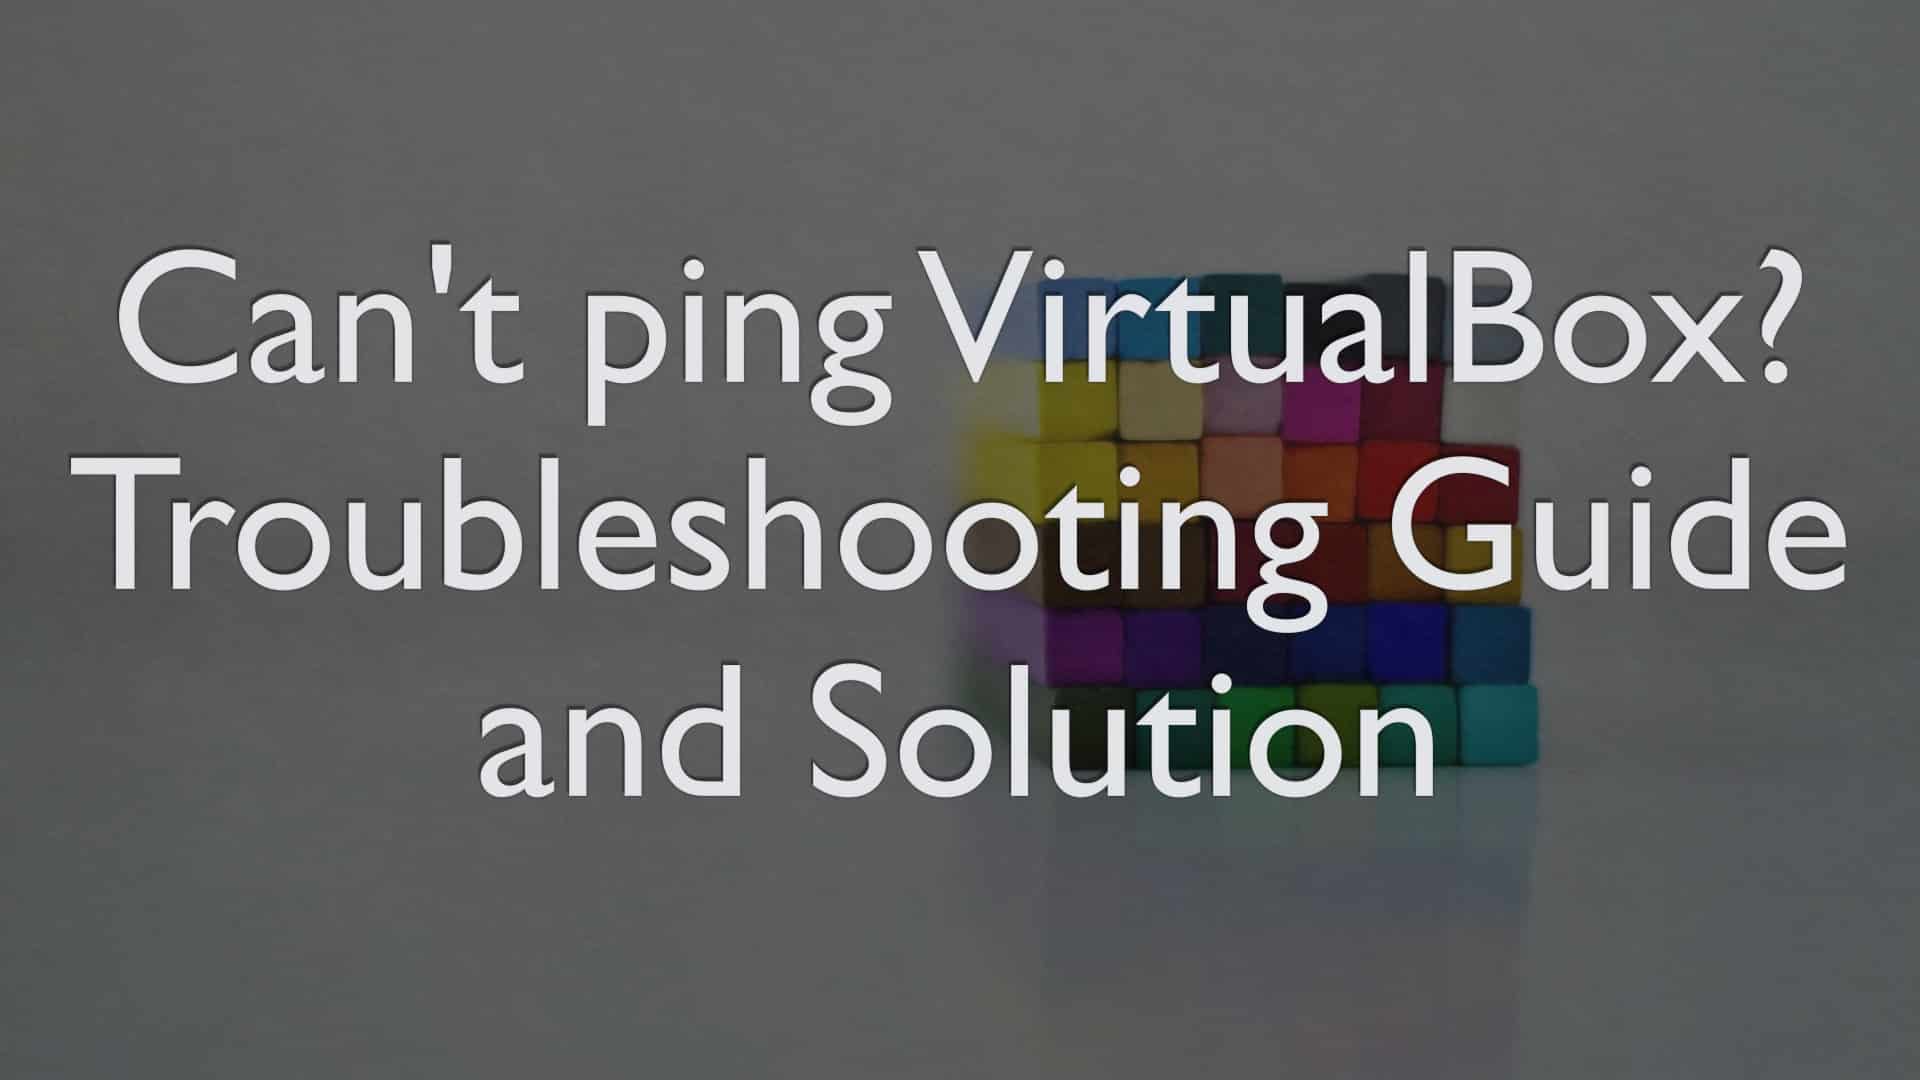 Can’t ping VirtualBox? Troubleshooting Guide and Solution